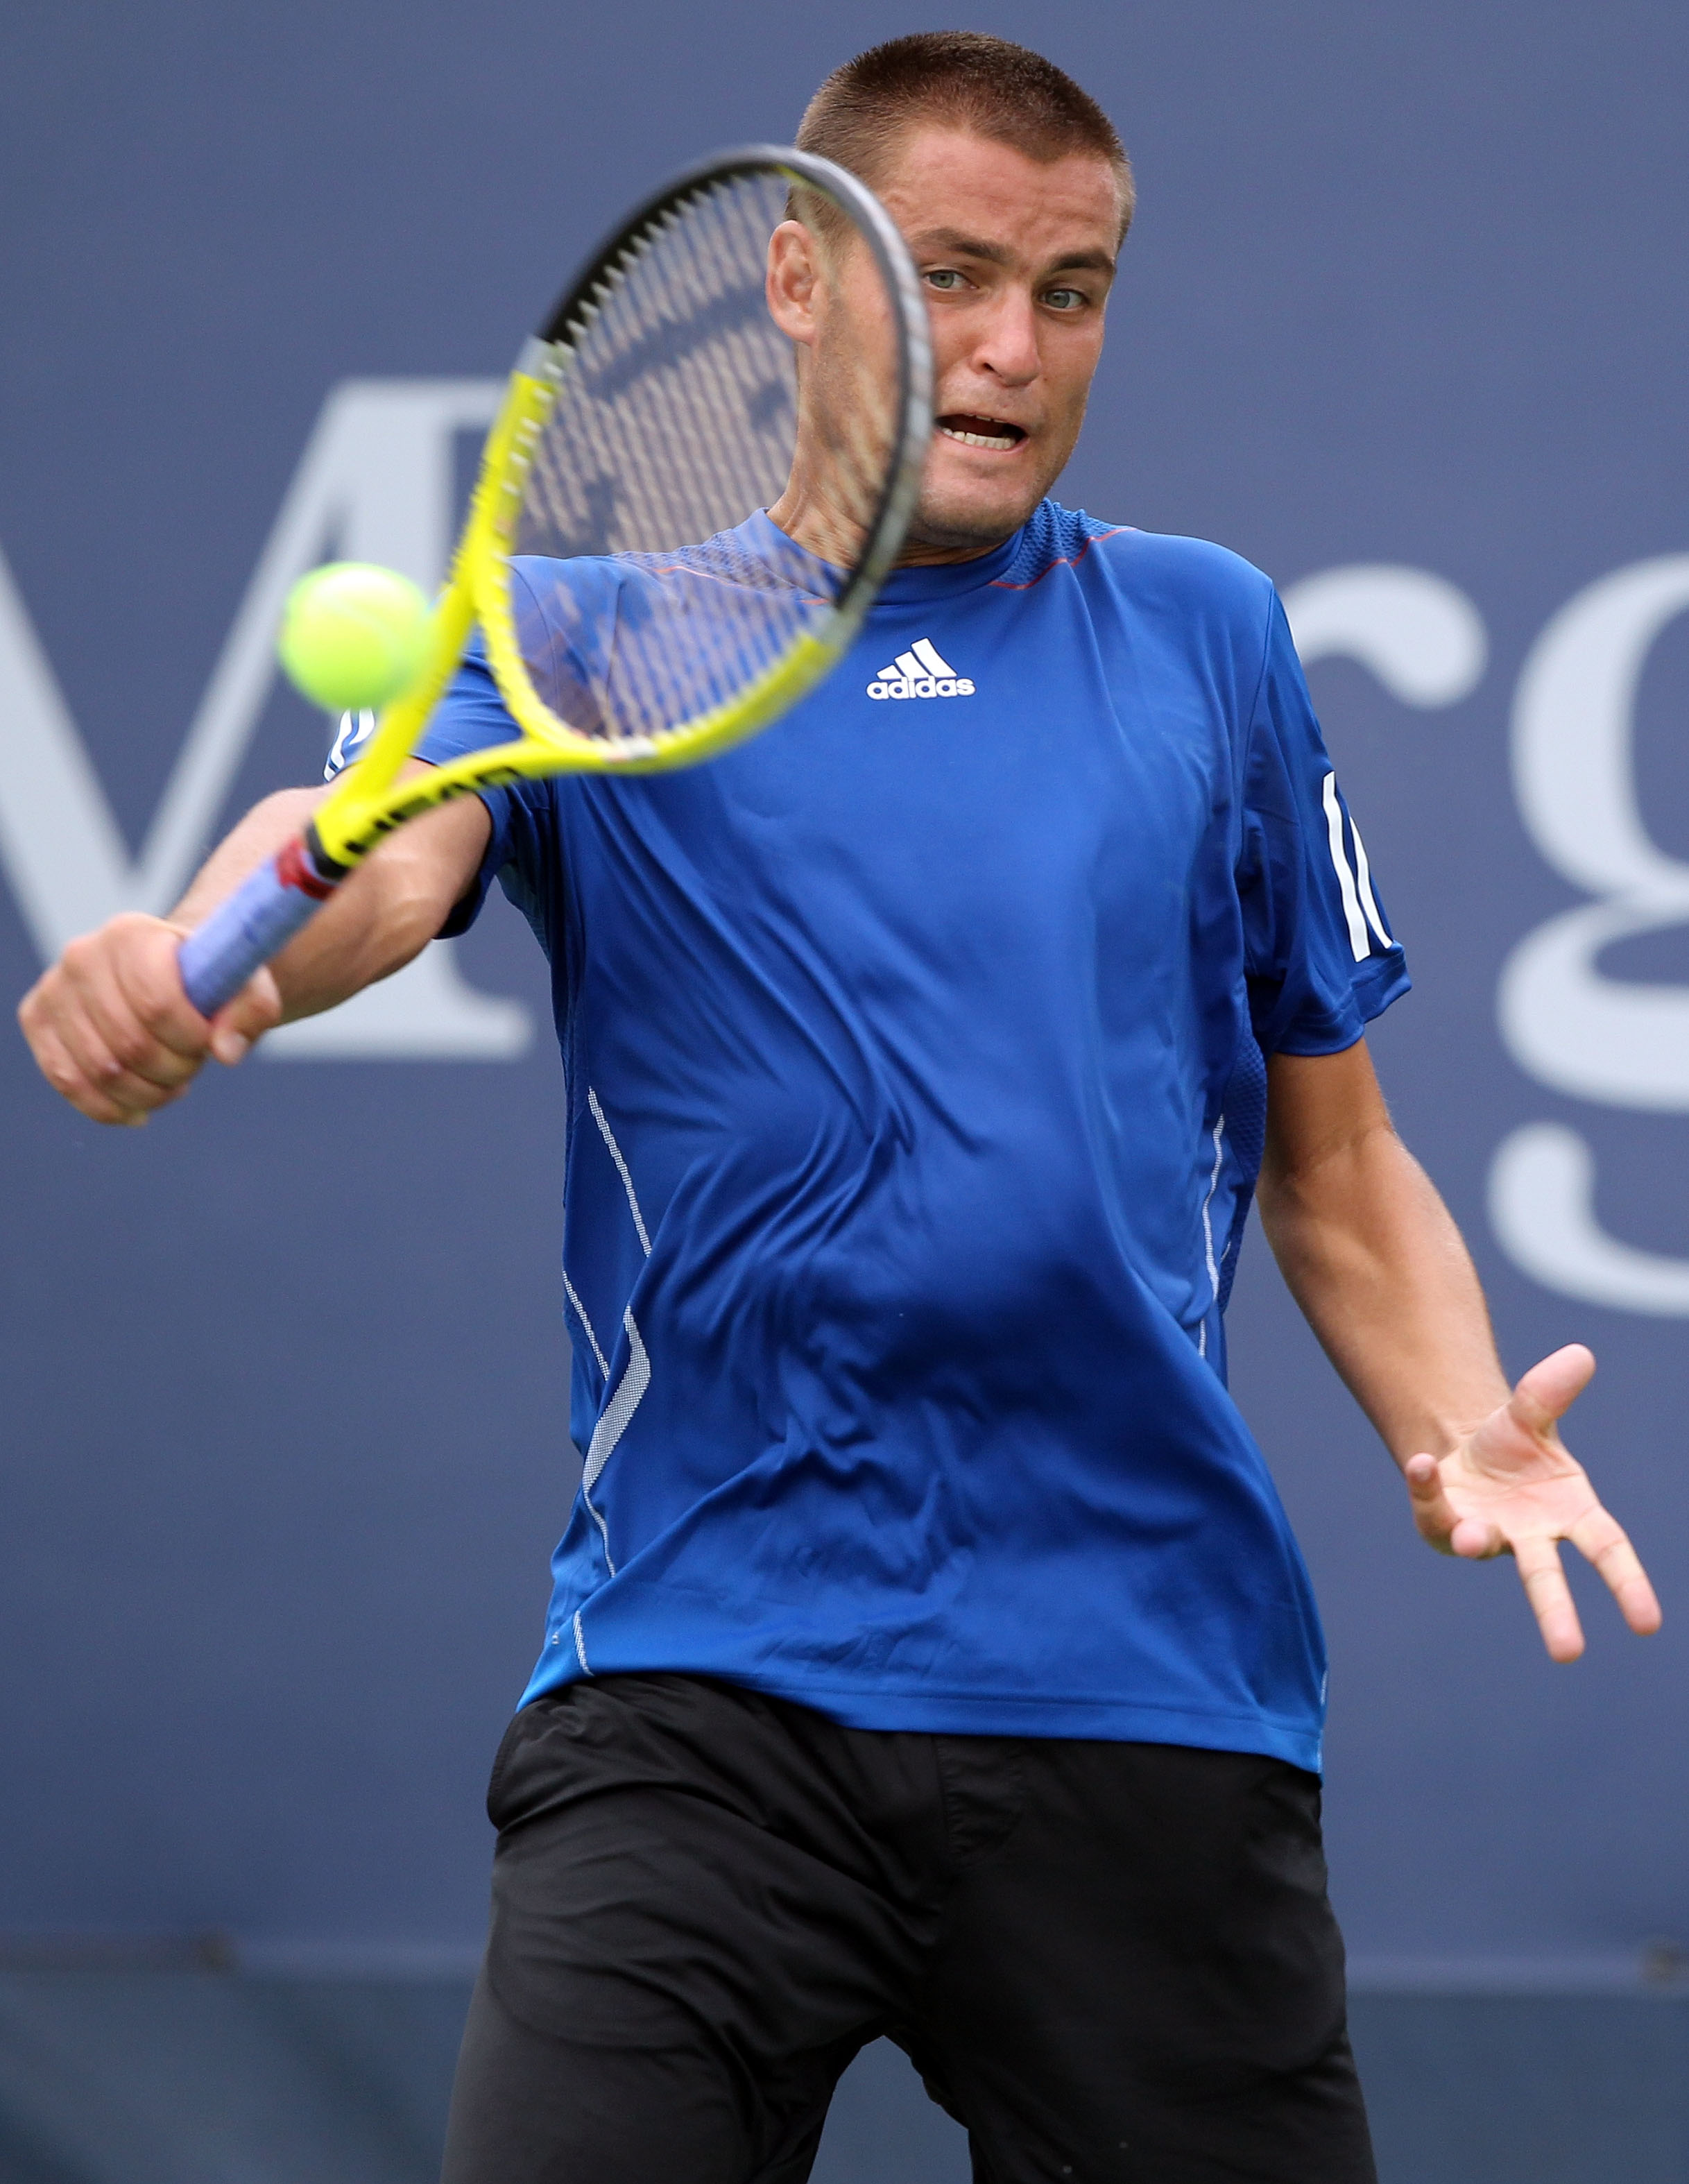 NEW YORK - SEPTEMBER 03:  Mikhail Youzhny of Russia returns a shot against Dudi Sela of Israel during his men's singles match on day five of the 2010 U.S. Open at the USTA Billie Jean King National Tennis Center on September 3, 2010 in the Flushing neighb